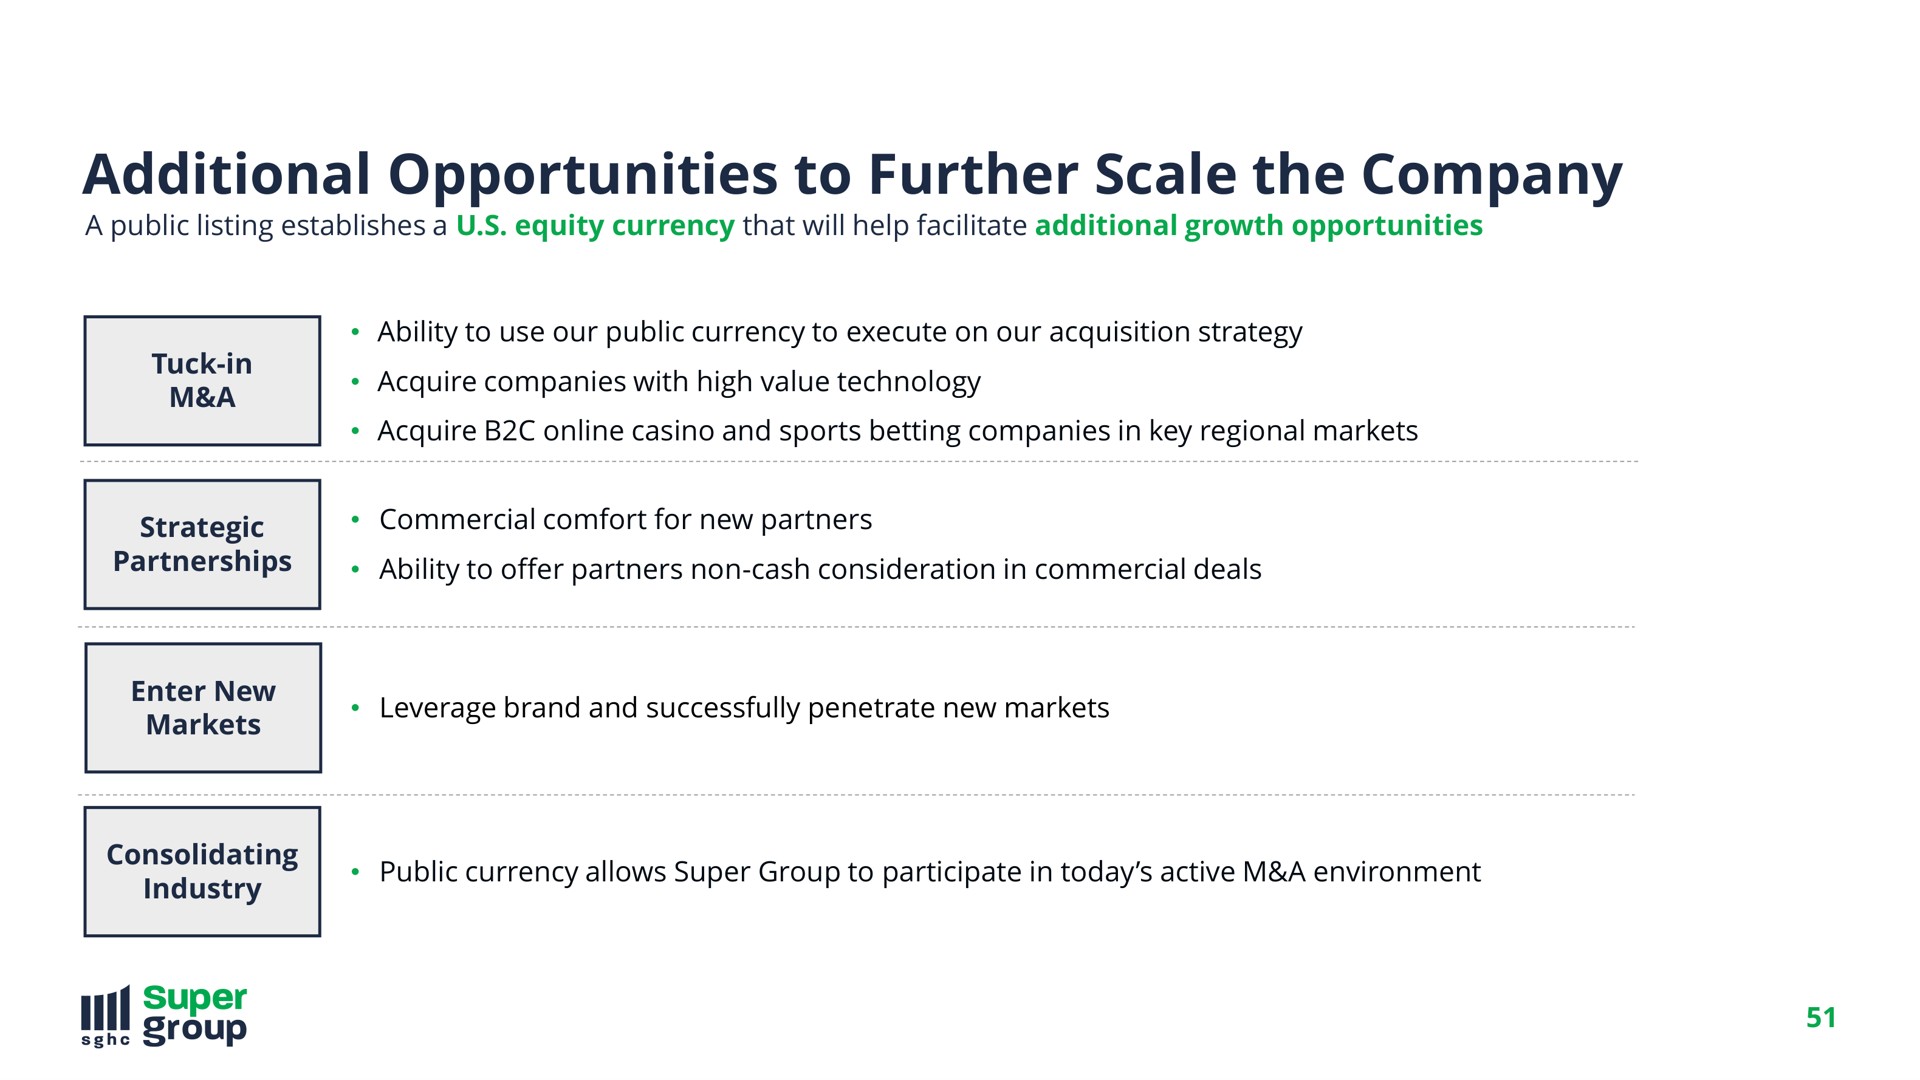 additional opportunities to further scale the company | SuperGroup